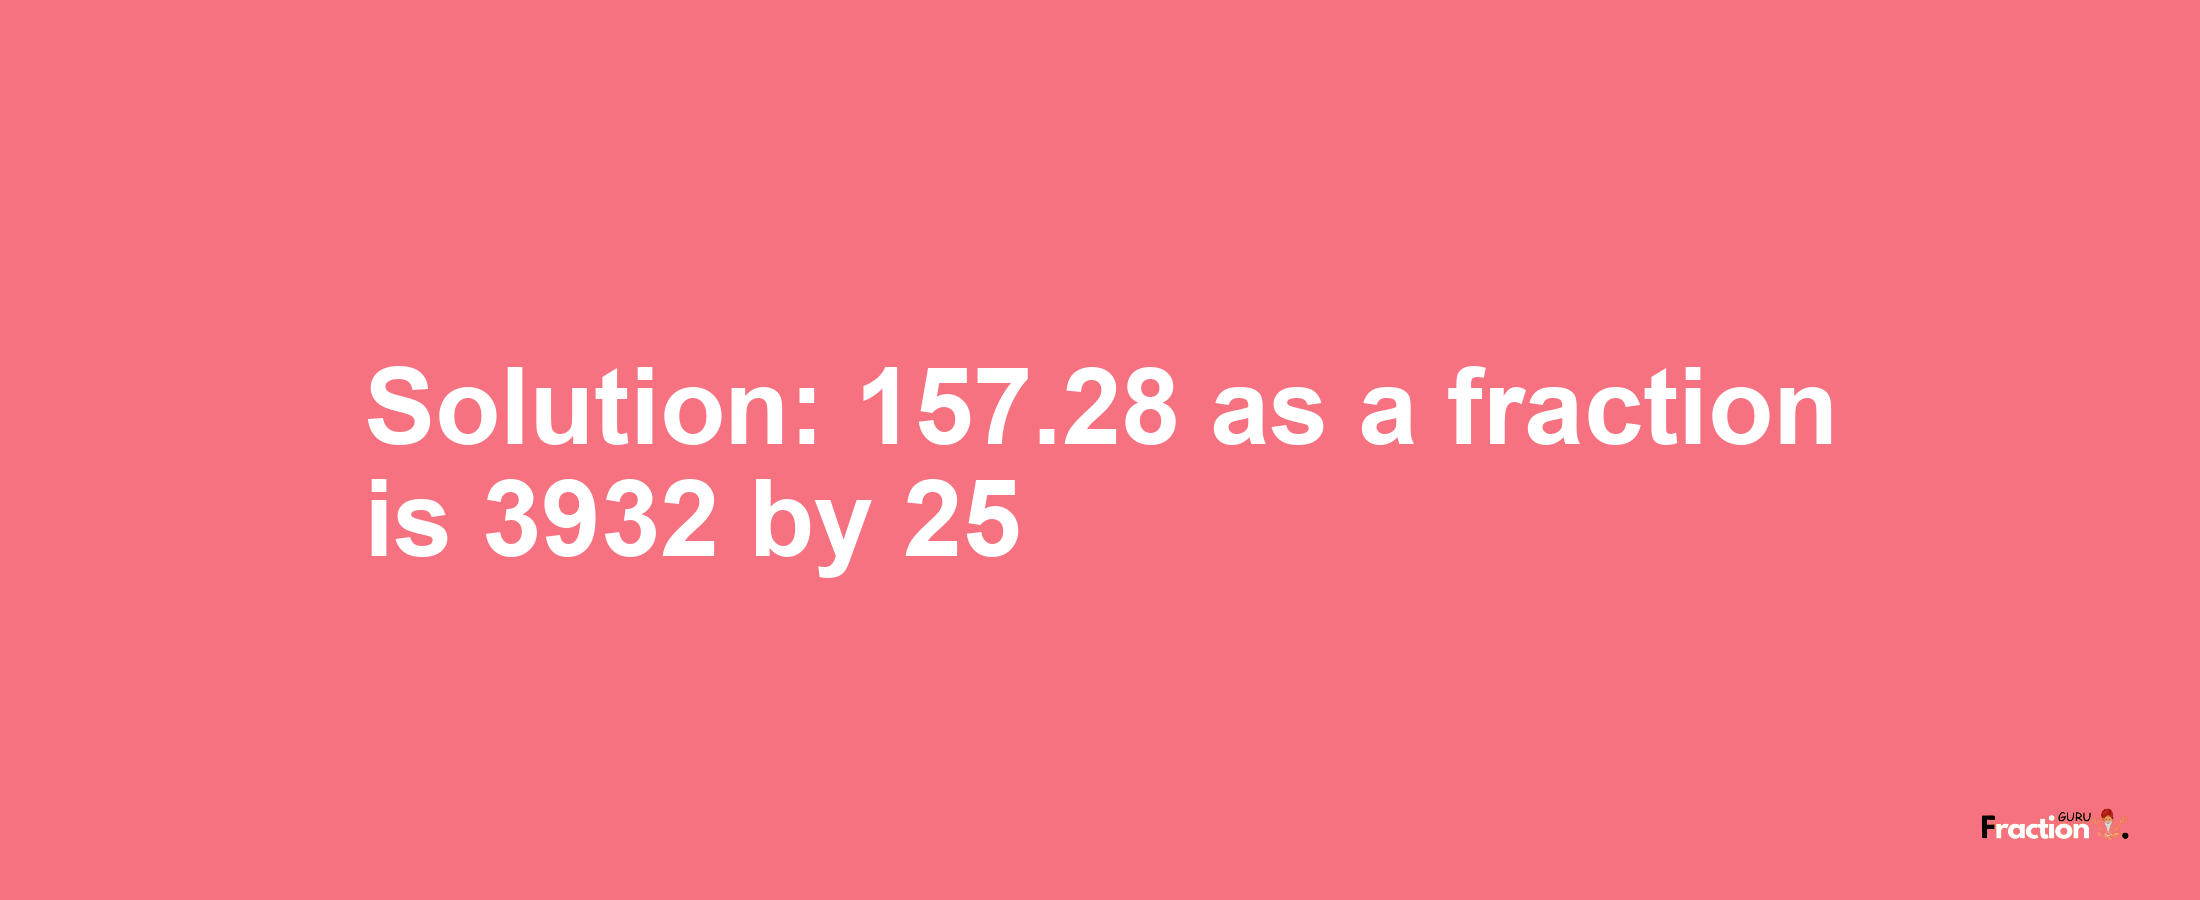 Solution:157.28 as a fraction is 3932/25